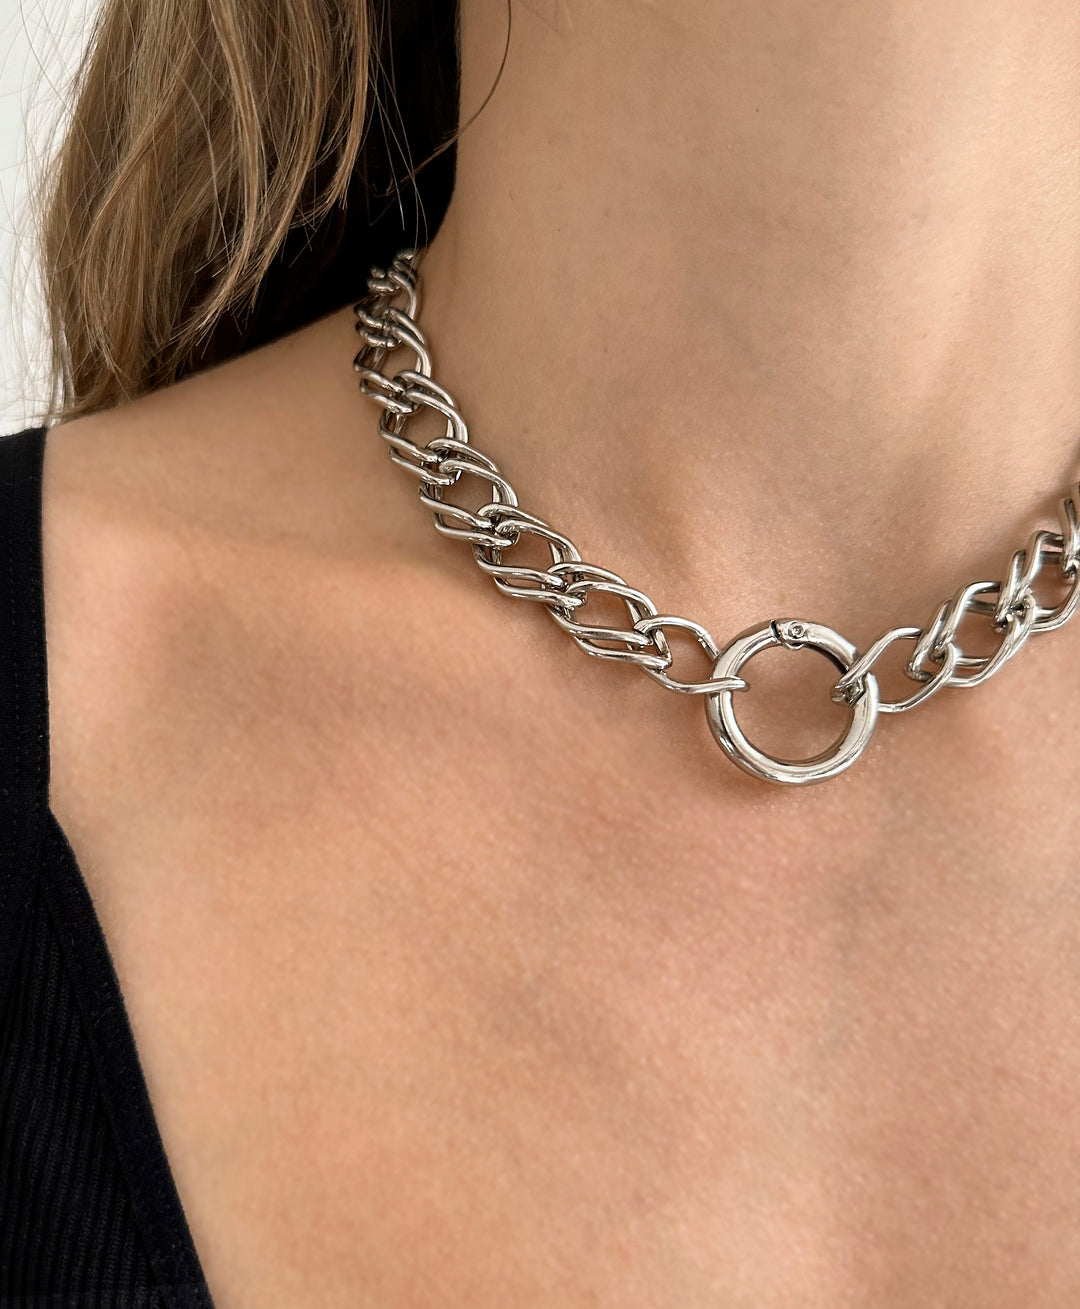 llayers-mens-women-jewelry-silver-stainlesssteel-choker-chain-necklace-unchained-005-Brooklyn-New-York-6